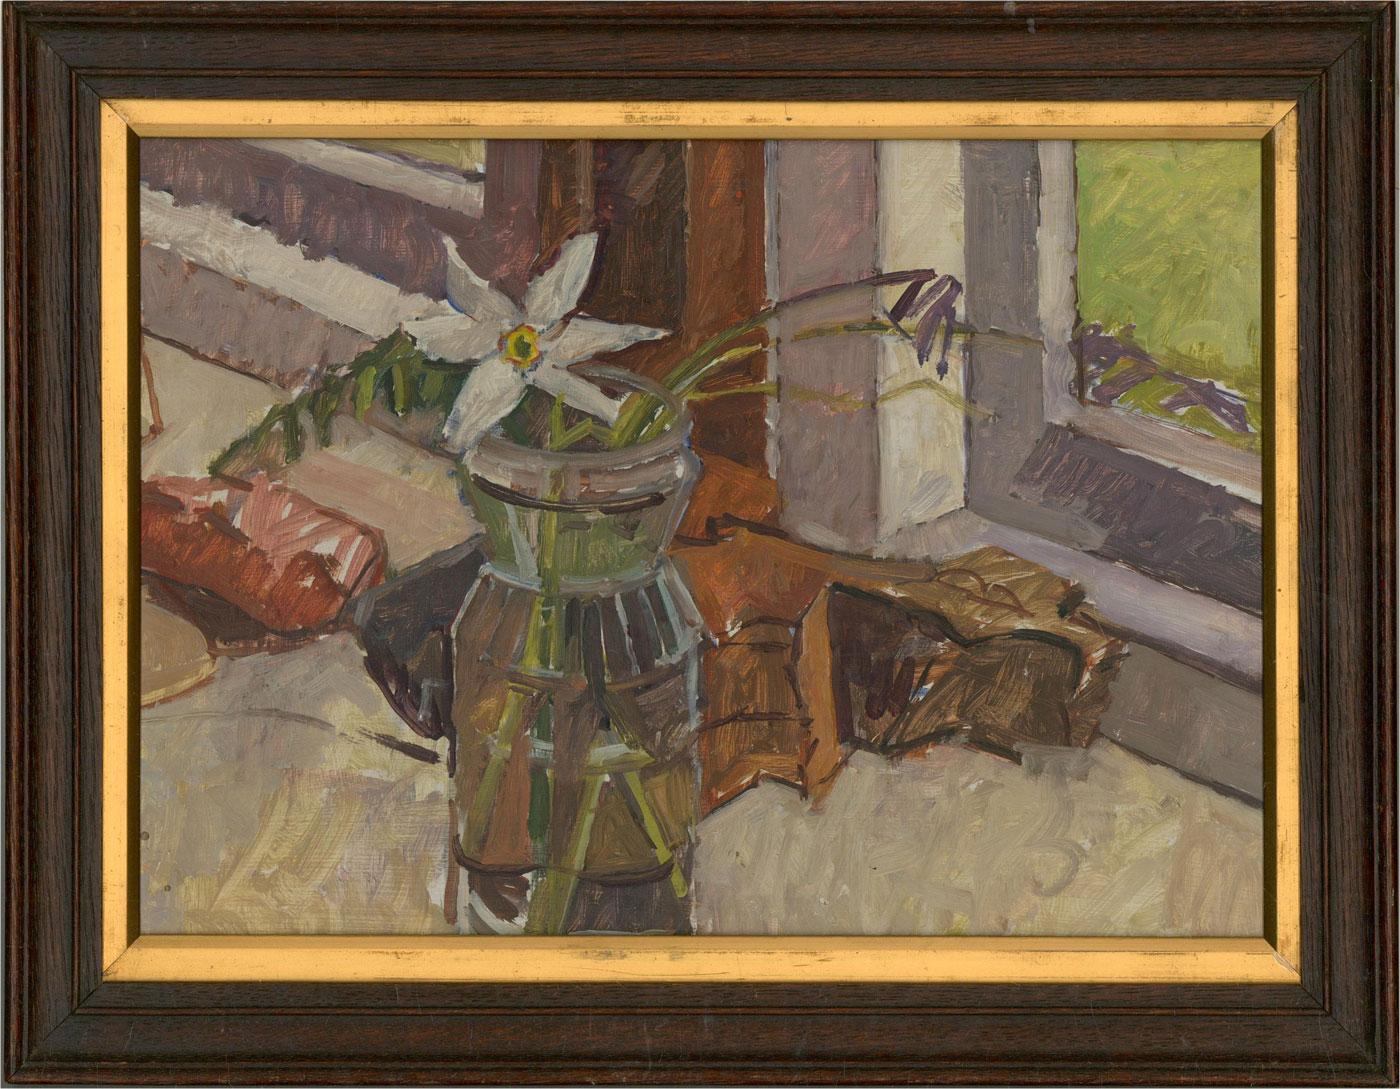 Roger Bliss - 20th Century Oil, White Flower by Window Sill 2